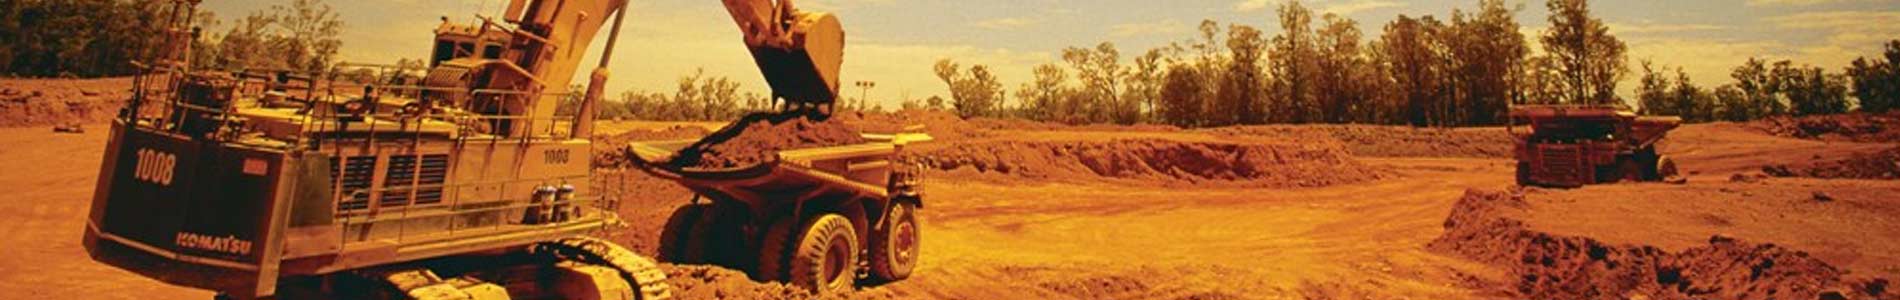 Mining iron ore dump truck and loader operations